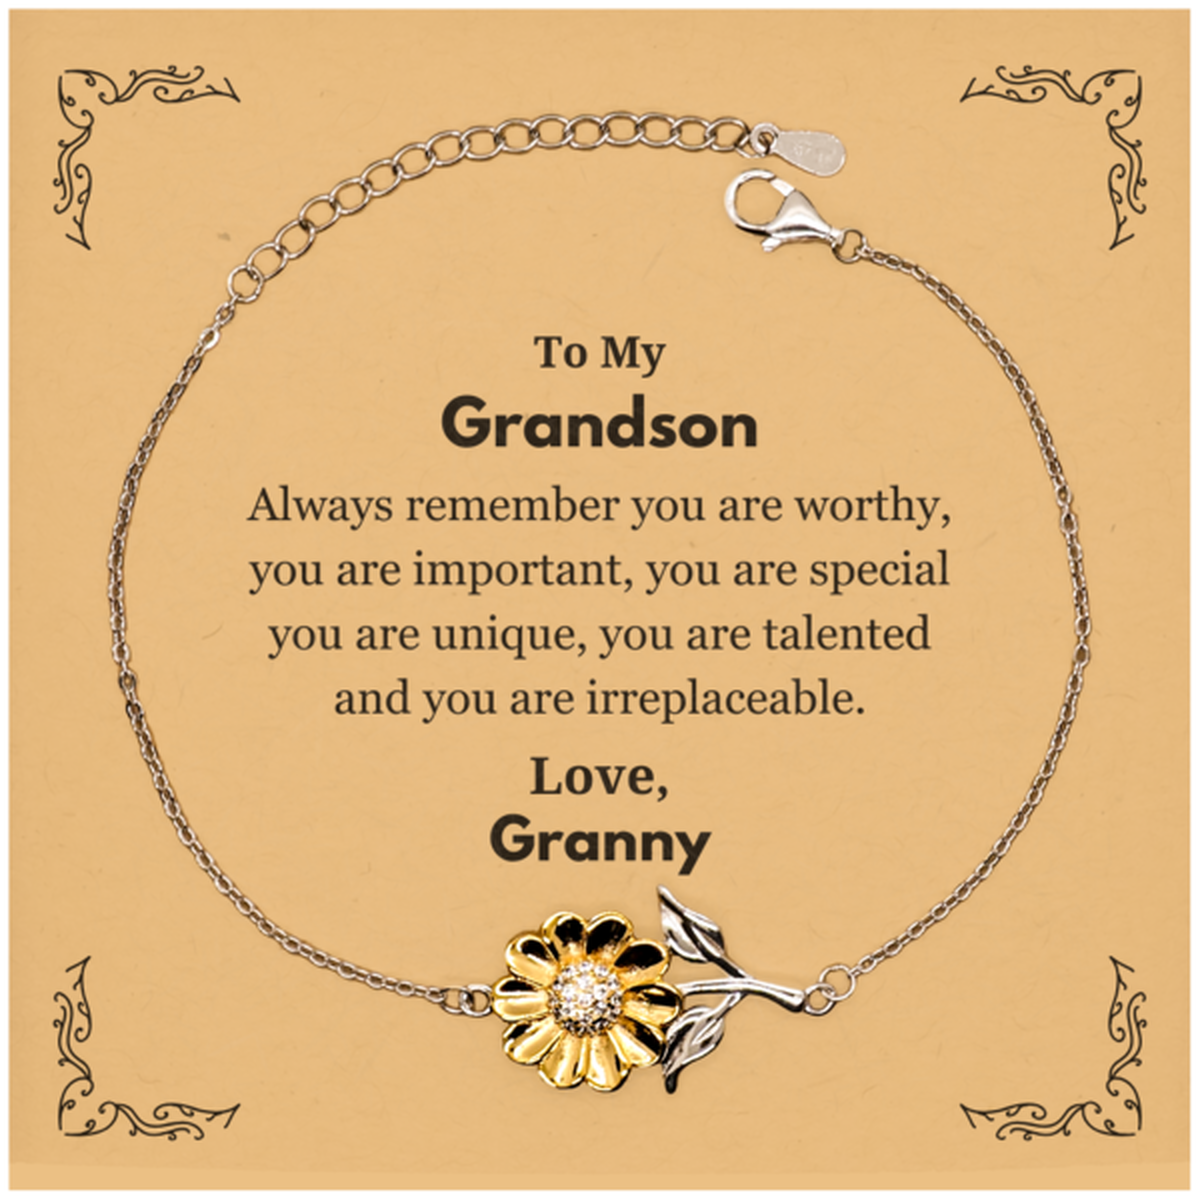 Grandson Birthday Gifts from Granny, Inspirational Sunflower Bracelet for Grandson Christmas Graduation Gifts for Grandson Always remember you are worthy, you are important. Love, Granny